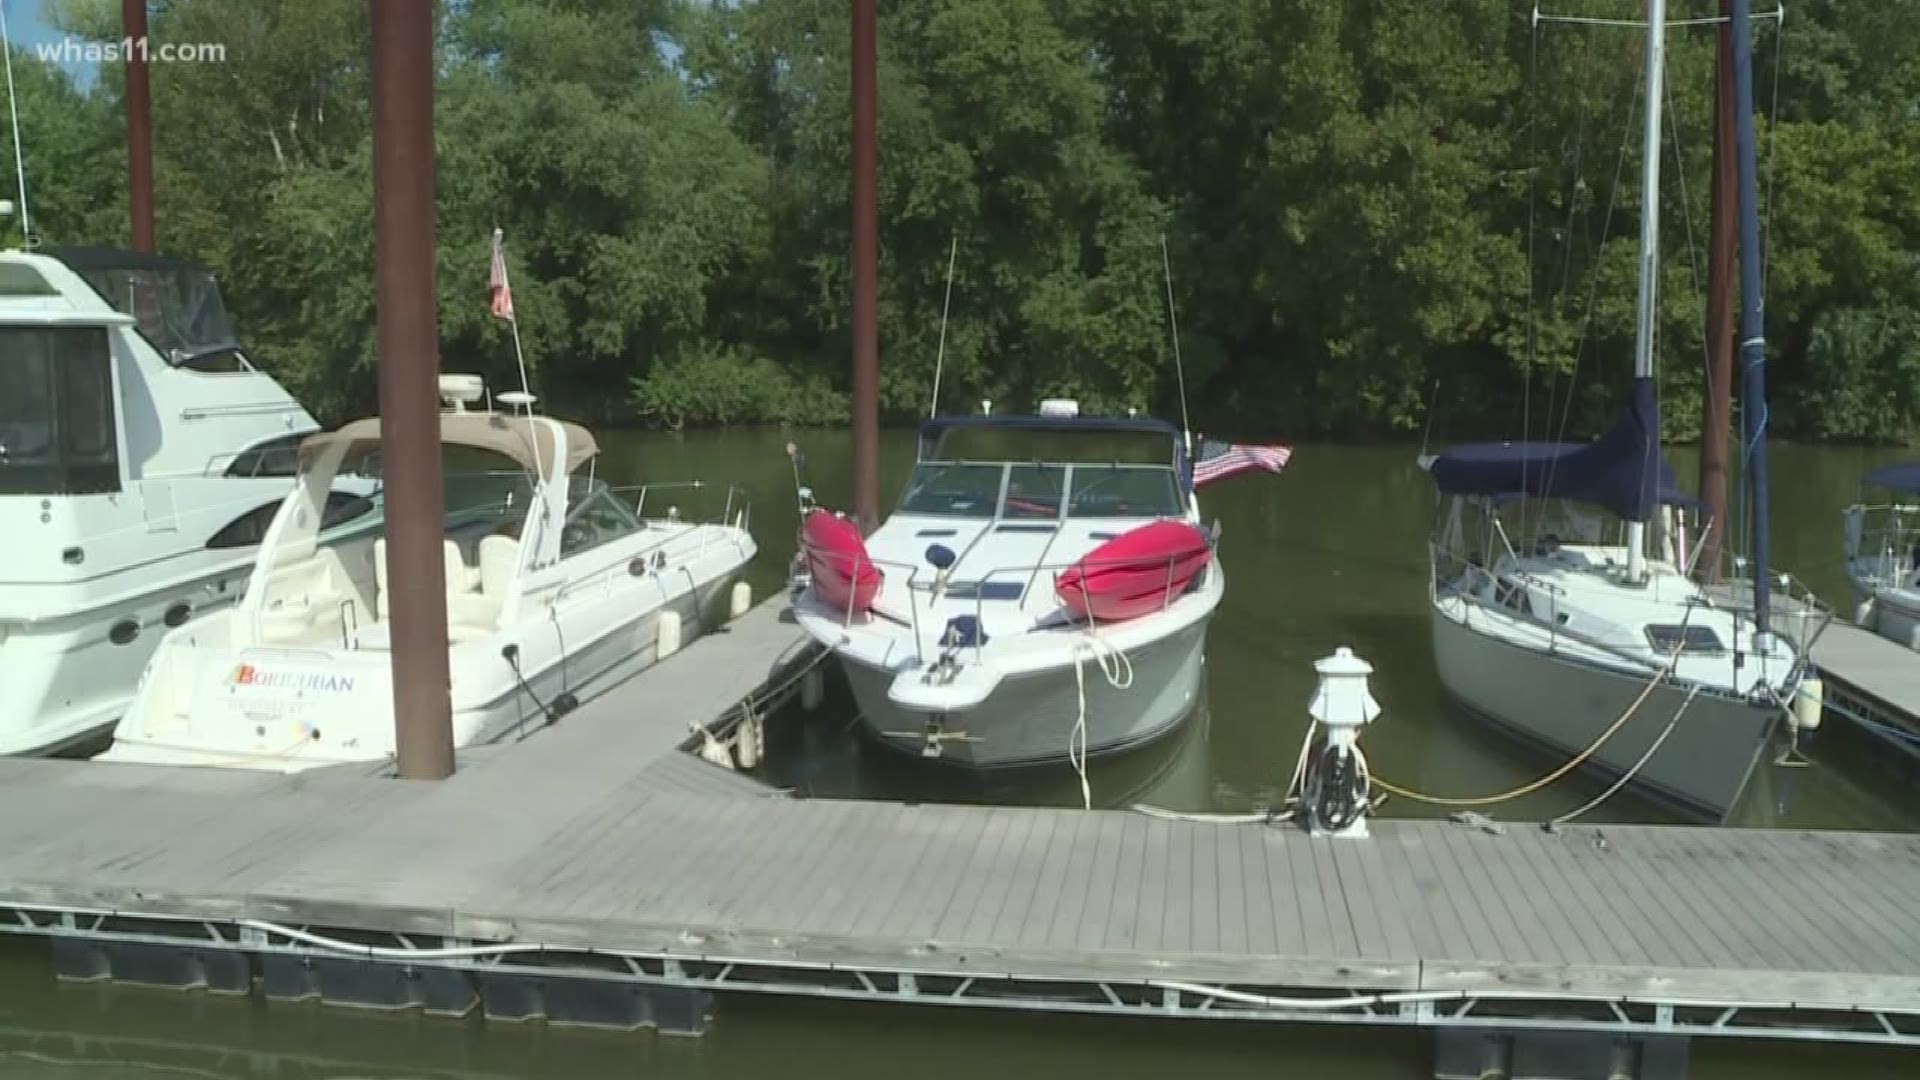 Hundreds will spend the holiday weekend on the Ohio River. While boaters are excited about the parties, they are still conscious of being safe.